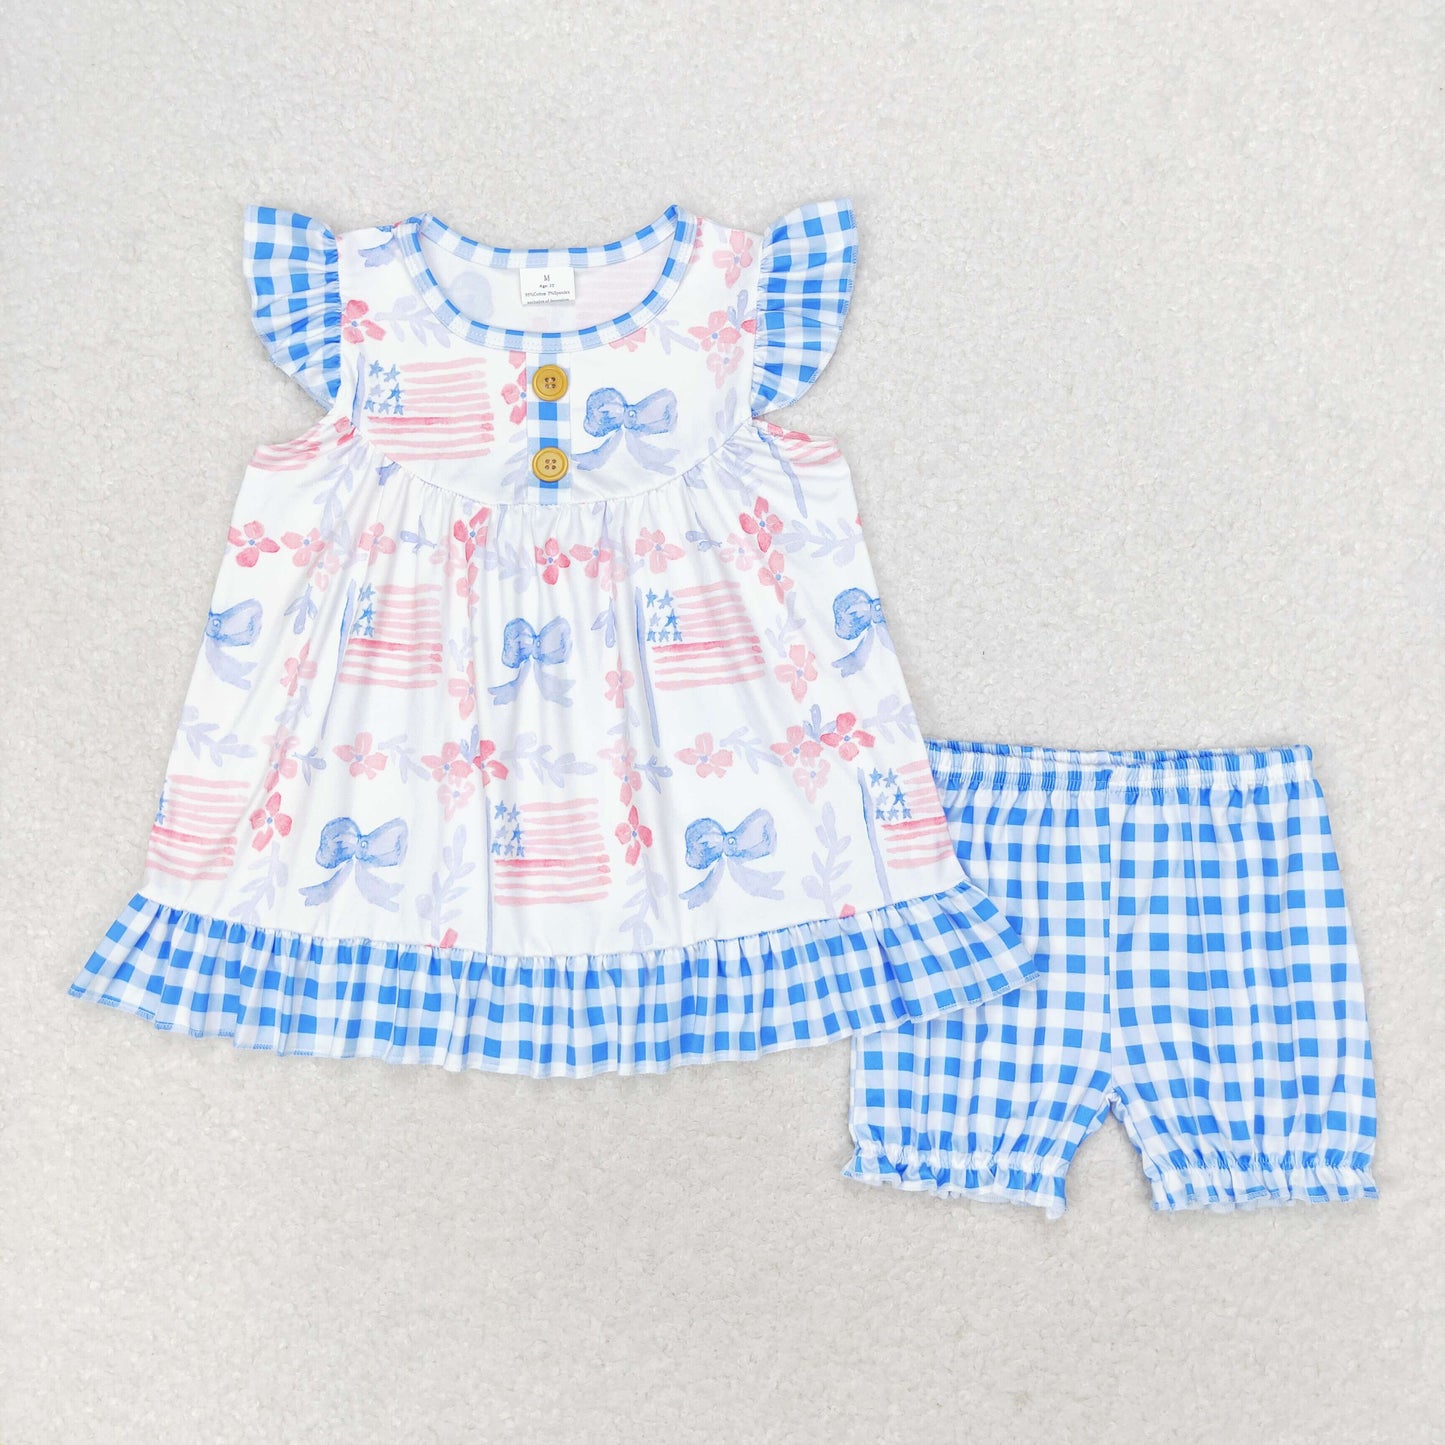 Baby Girls Boys Sibling 4th of July Bows Summer Rompers Clothes Sets